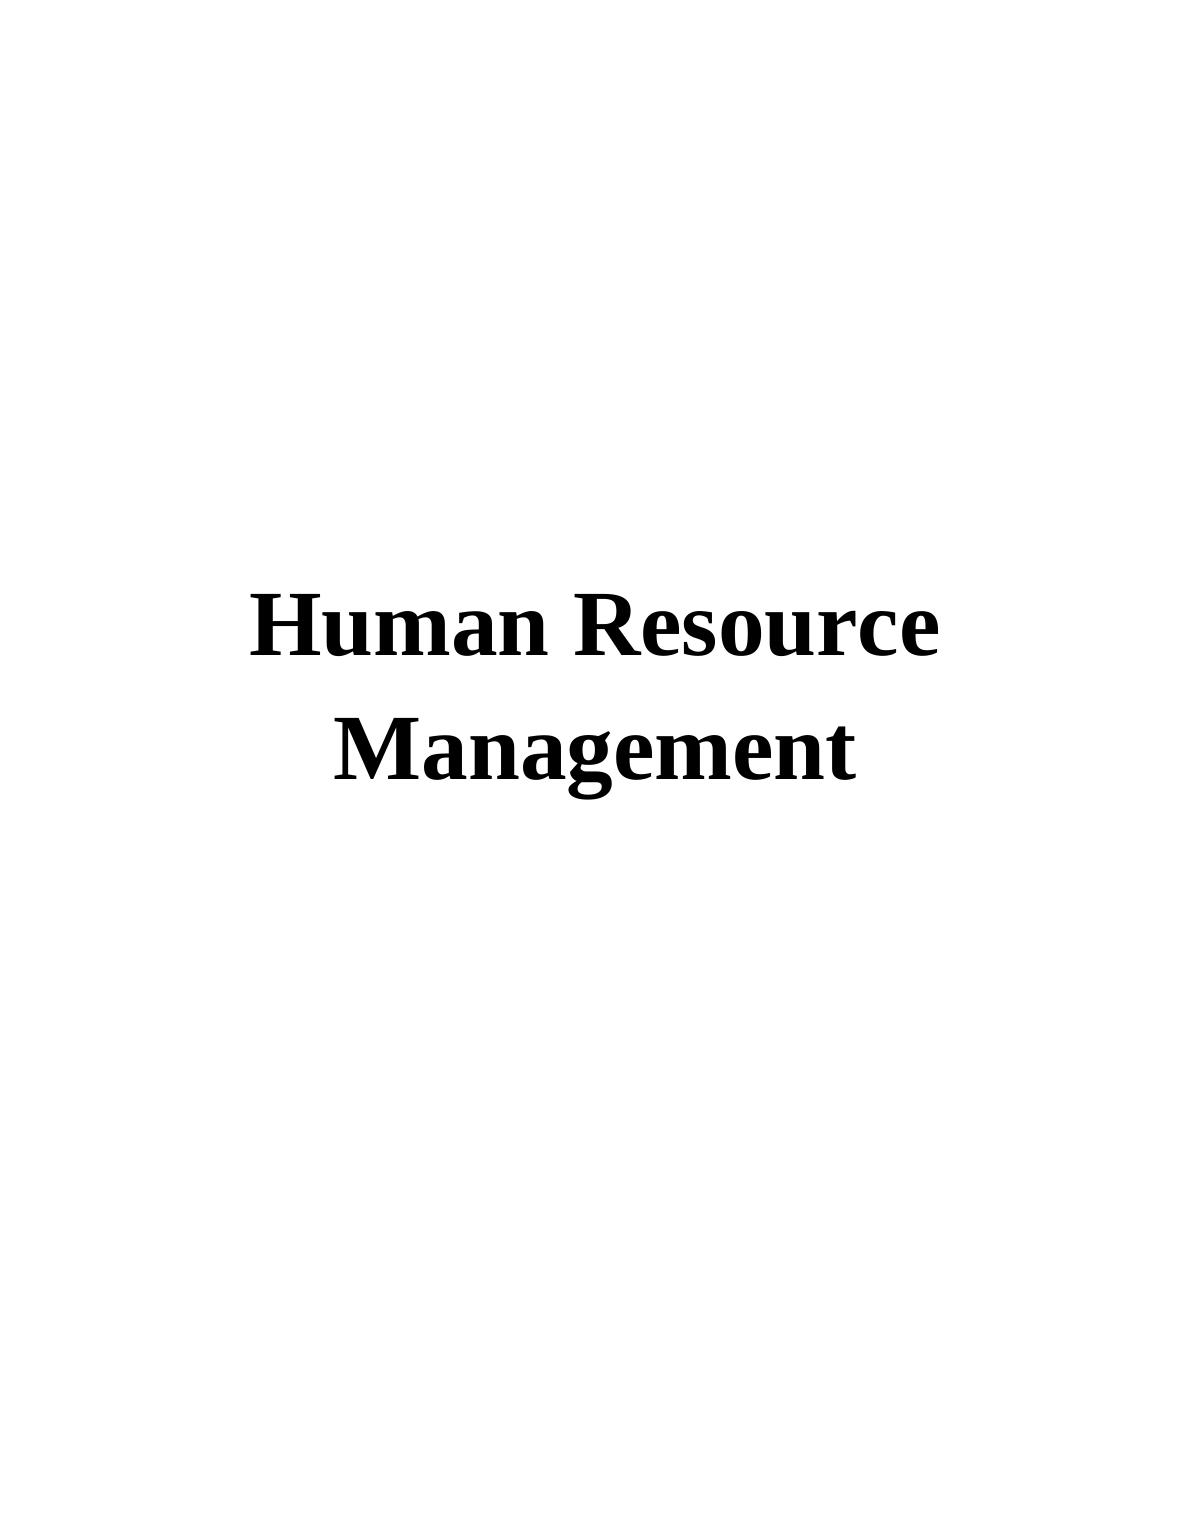 Importance of Employee Relations in HR Decision Making_1